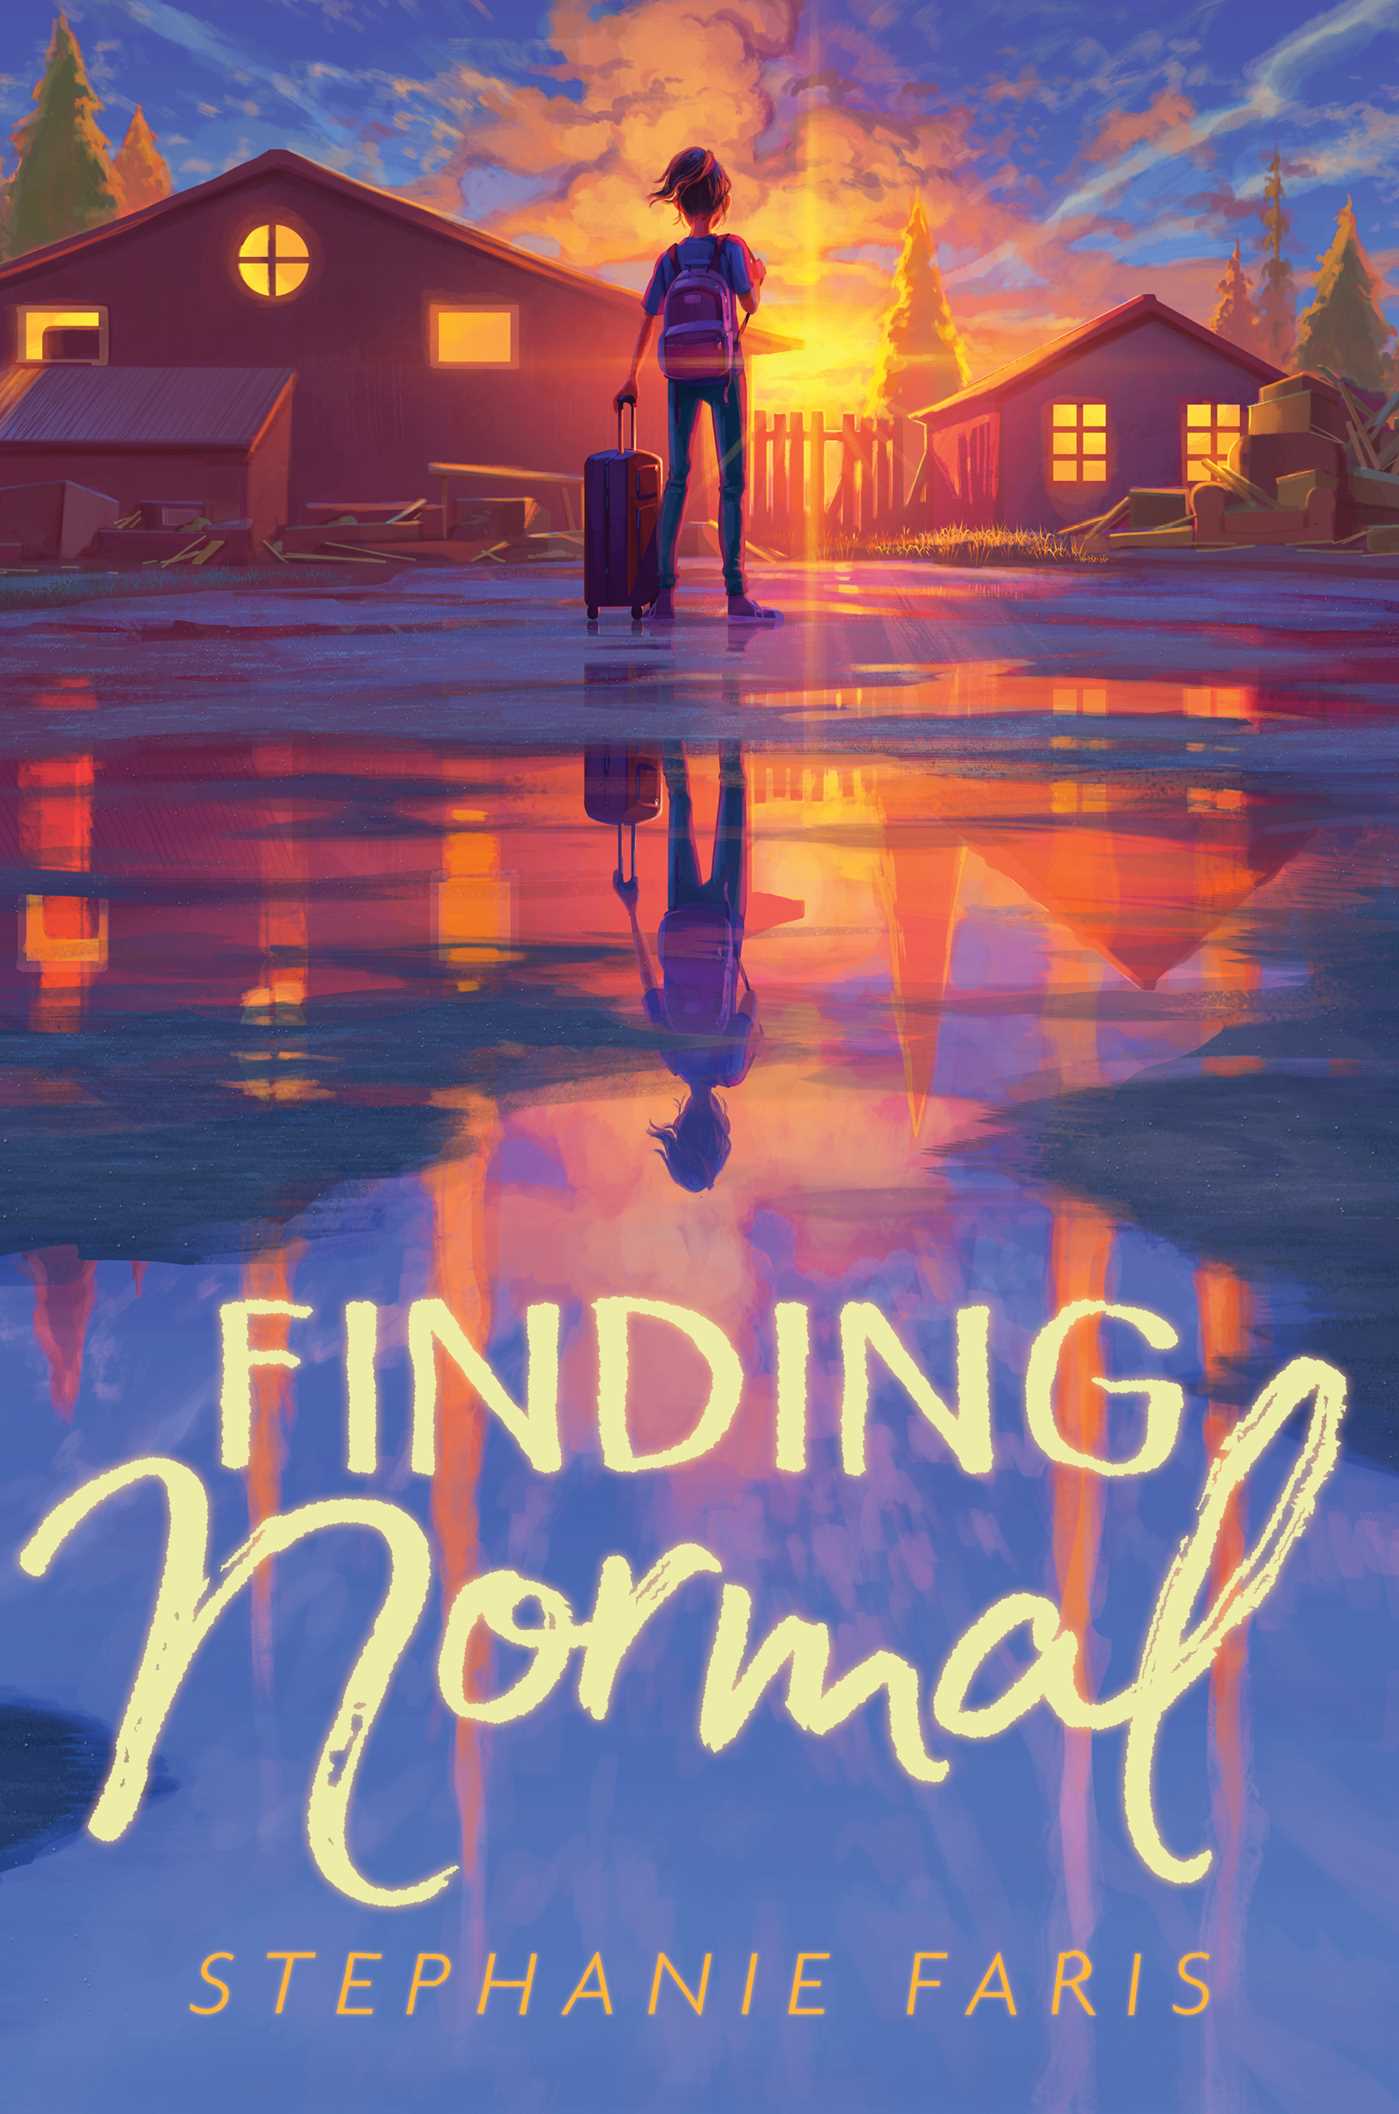 Image for "Finding Normal"